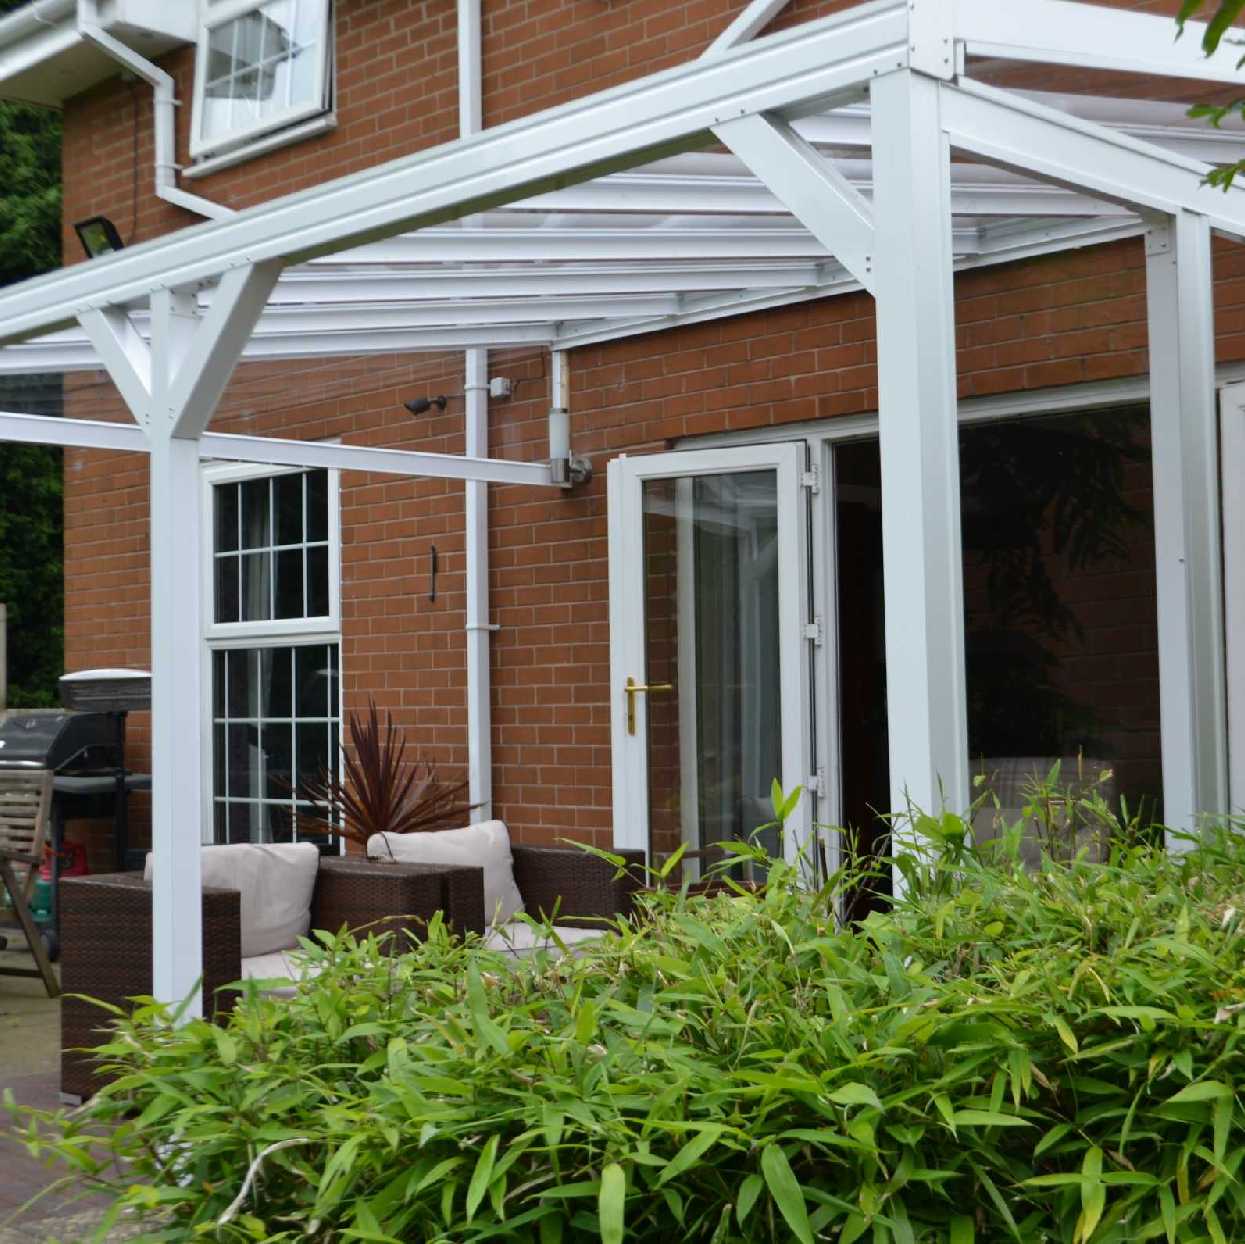 Omega Smart Lean-To Canopy, White with 6mm Glass Clear Plate Polycarbonate Glazing - 4.2m (W) x 3.5m (P), (3) Supporting Posts from Omega Build